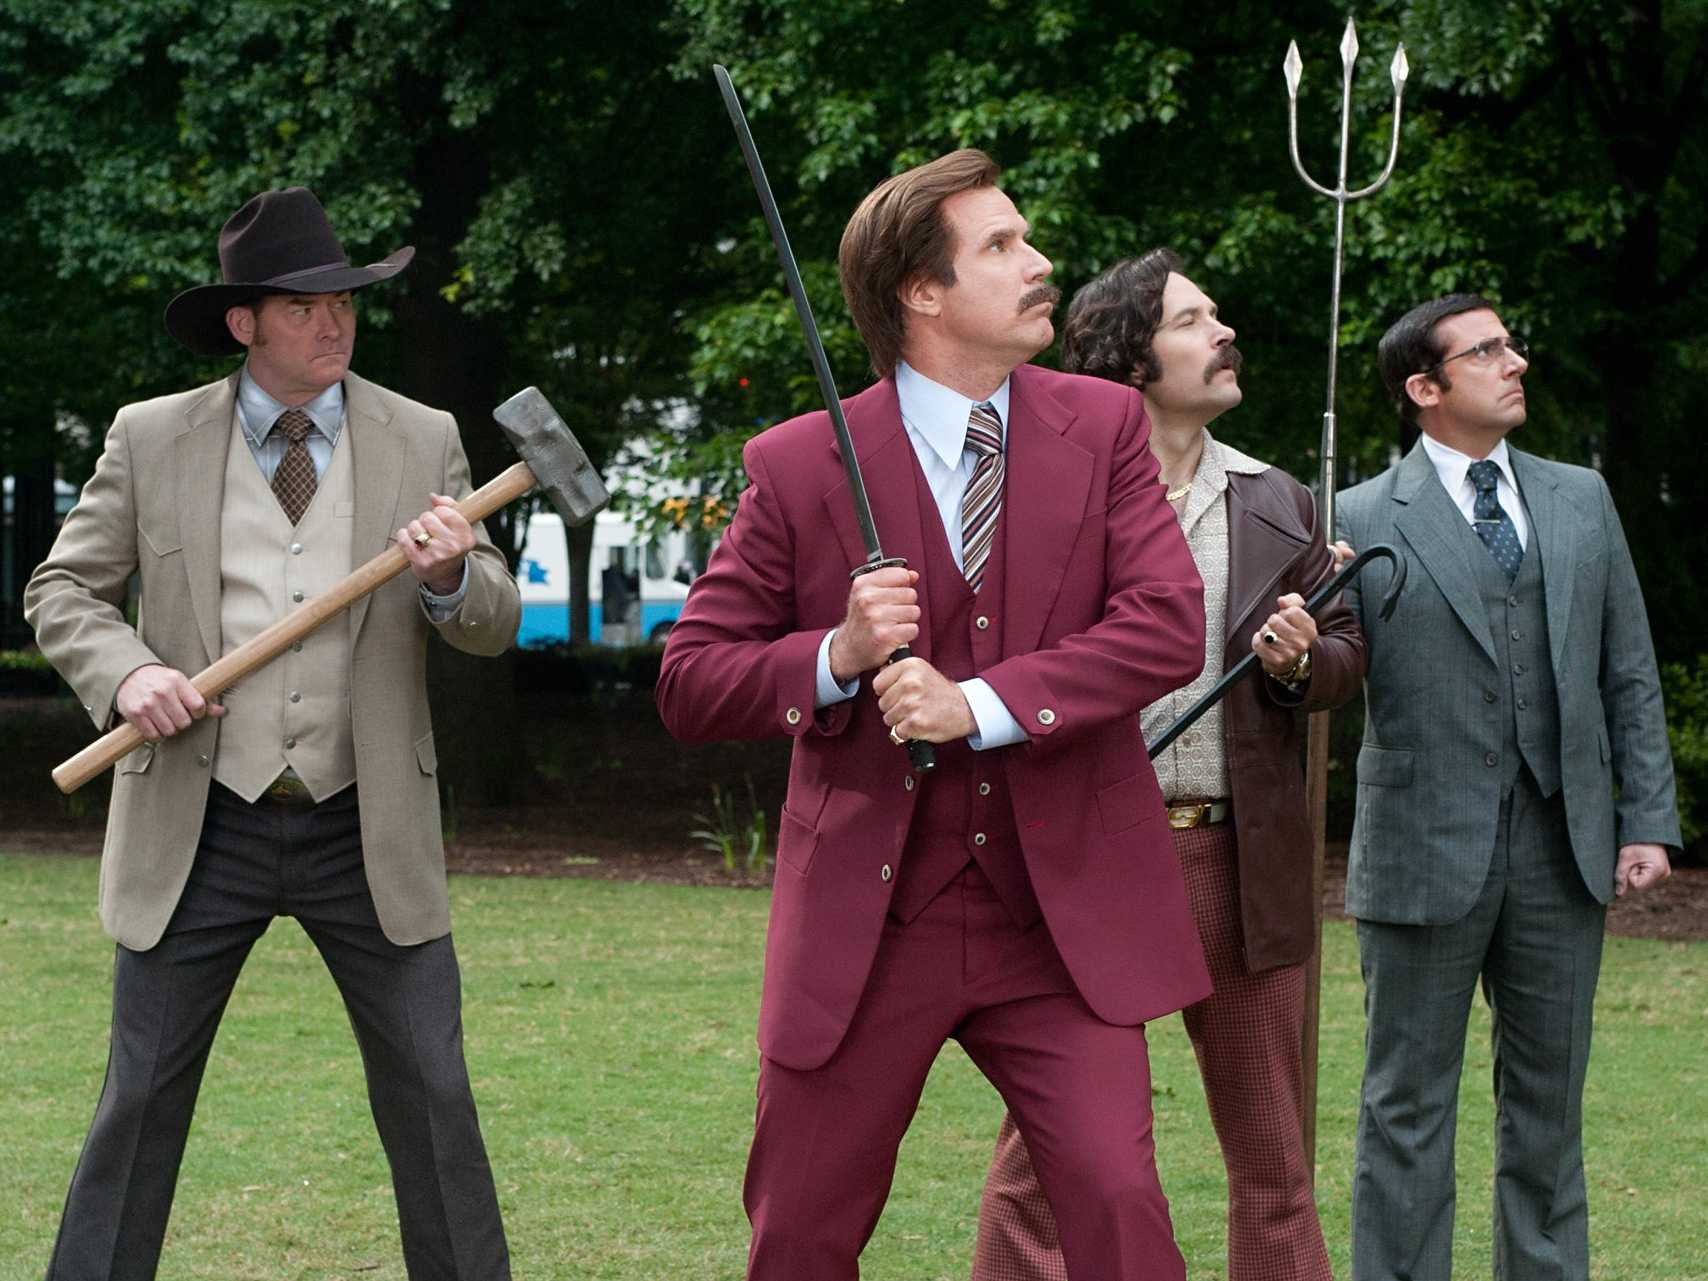 the-best-part-of-anchorman-2-features-a-star-studded-epic-news-team-brawl.jpg